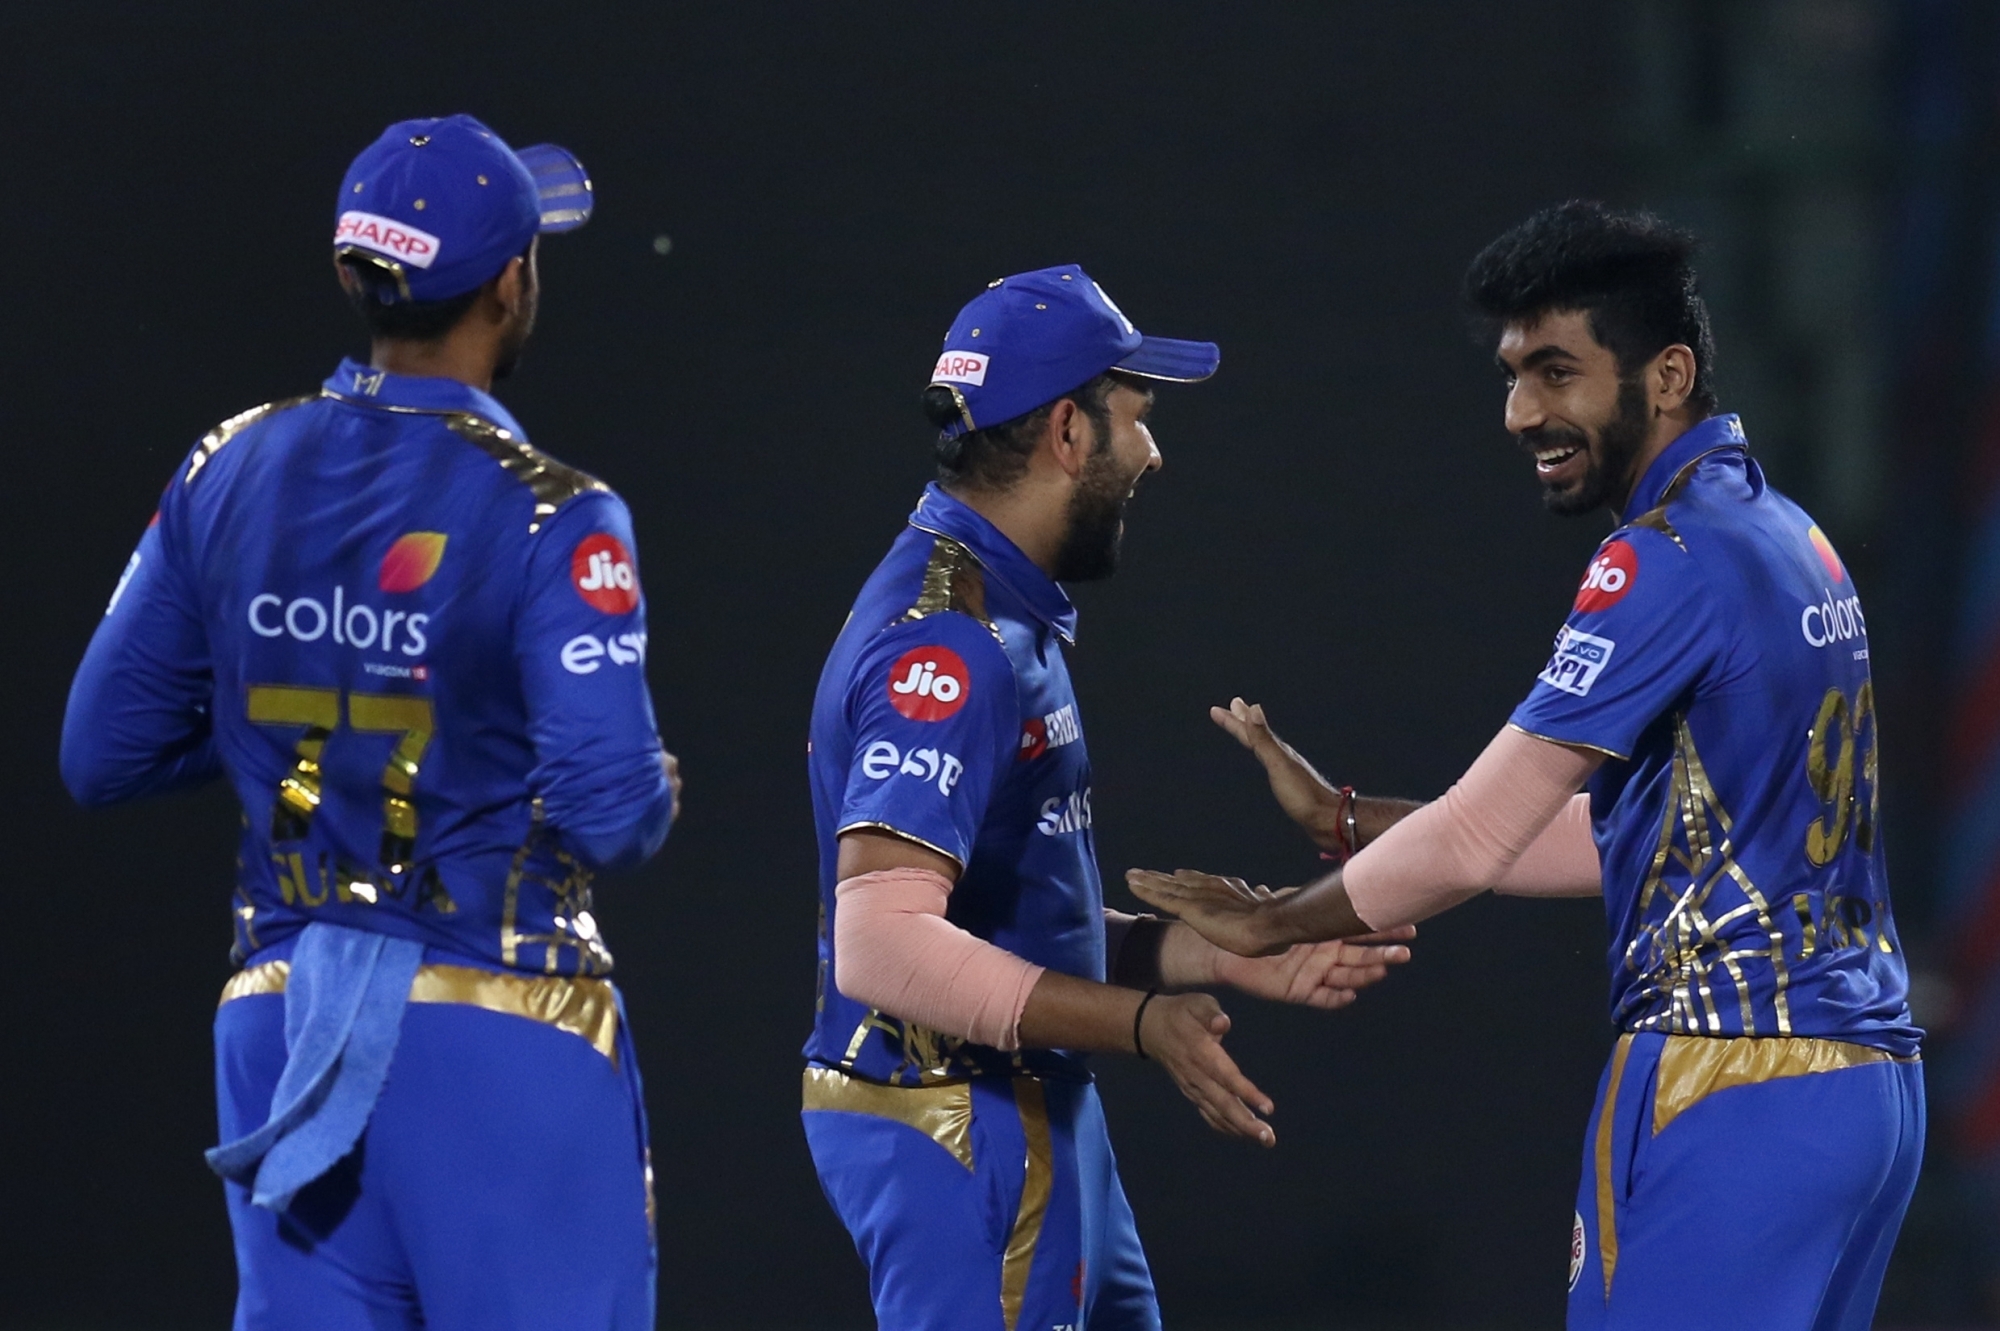 Rohit tries to ensure that he gets the most out of his teammates | IANS